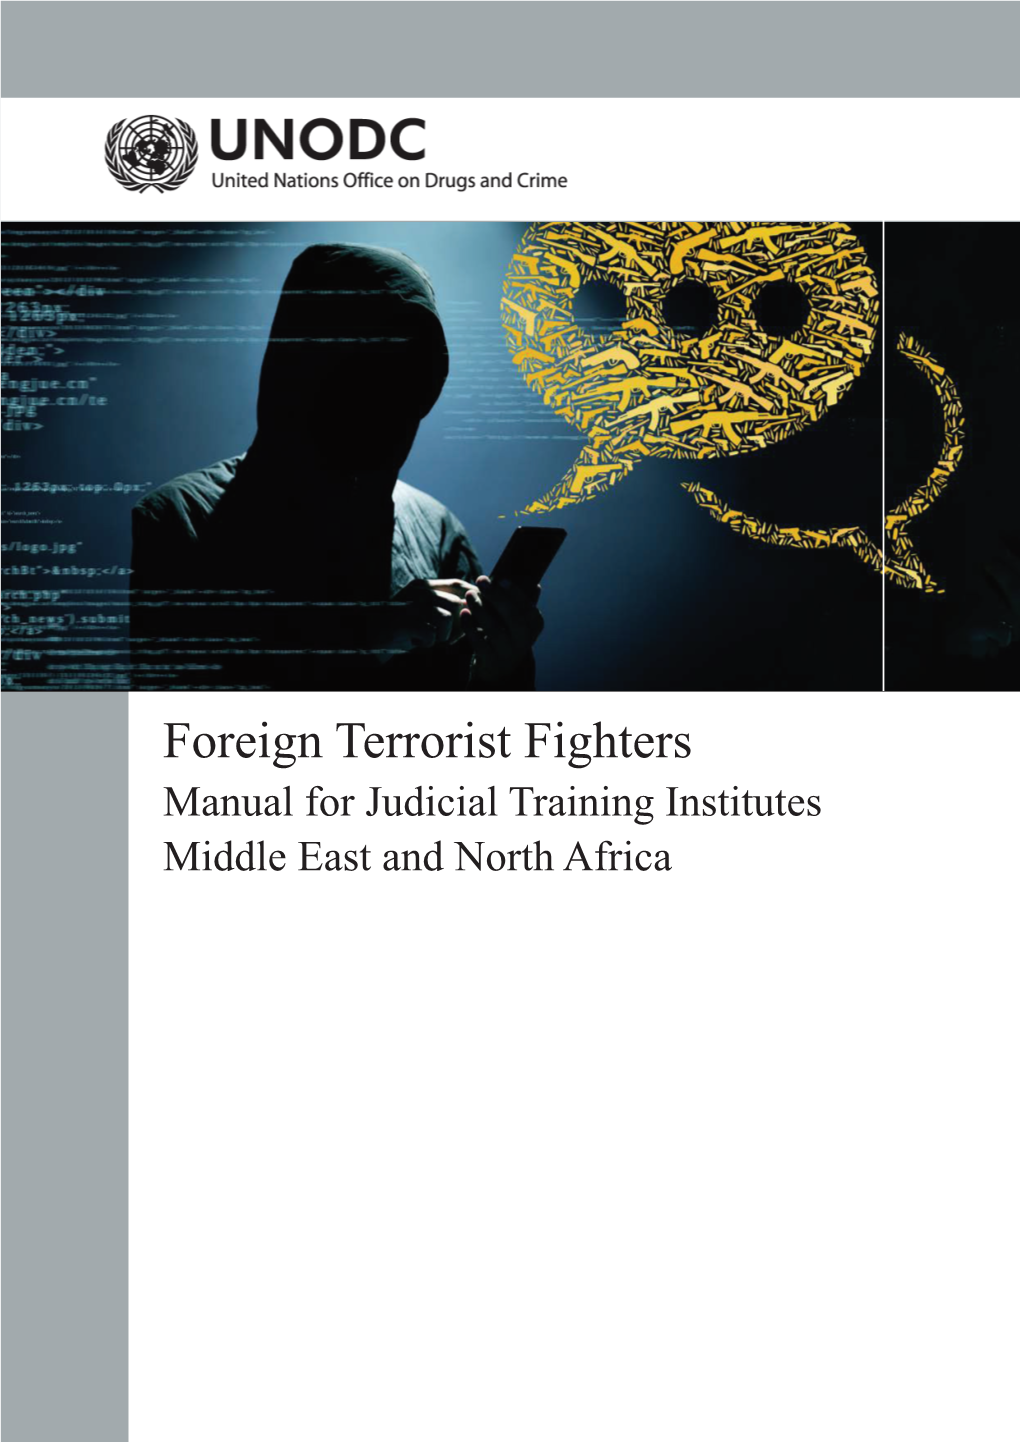 Foreign Terrorist Fighters Manual for Judicial Training Institutes Middle East and North Africa